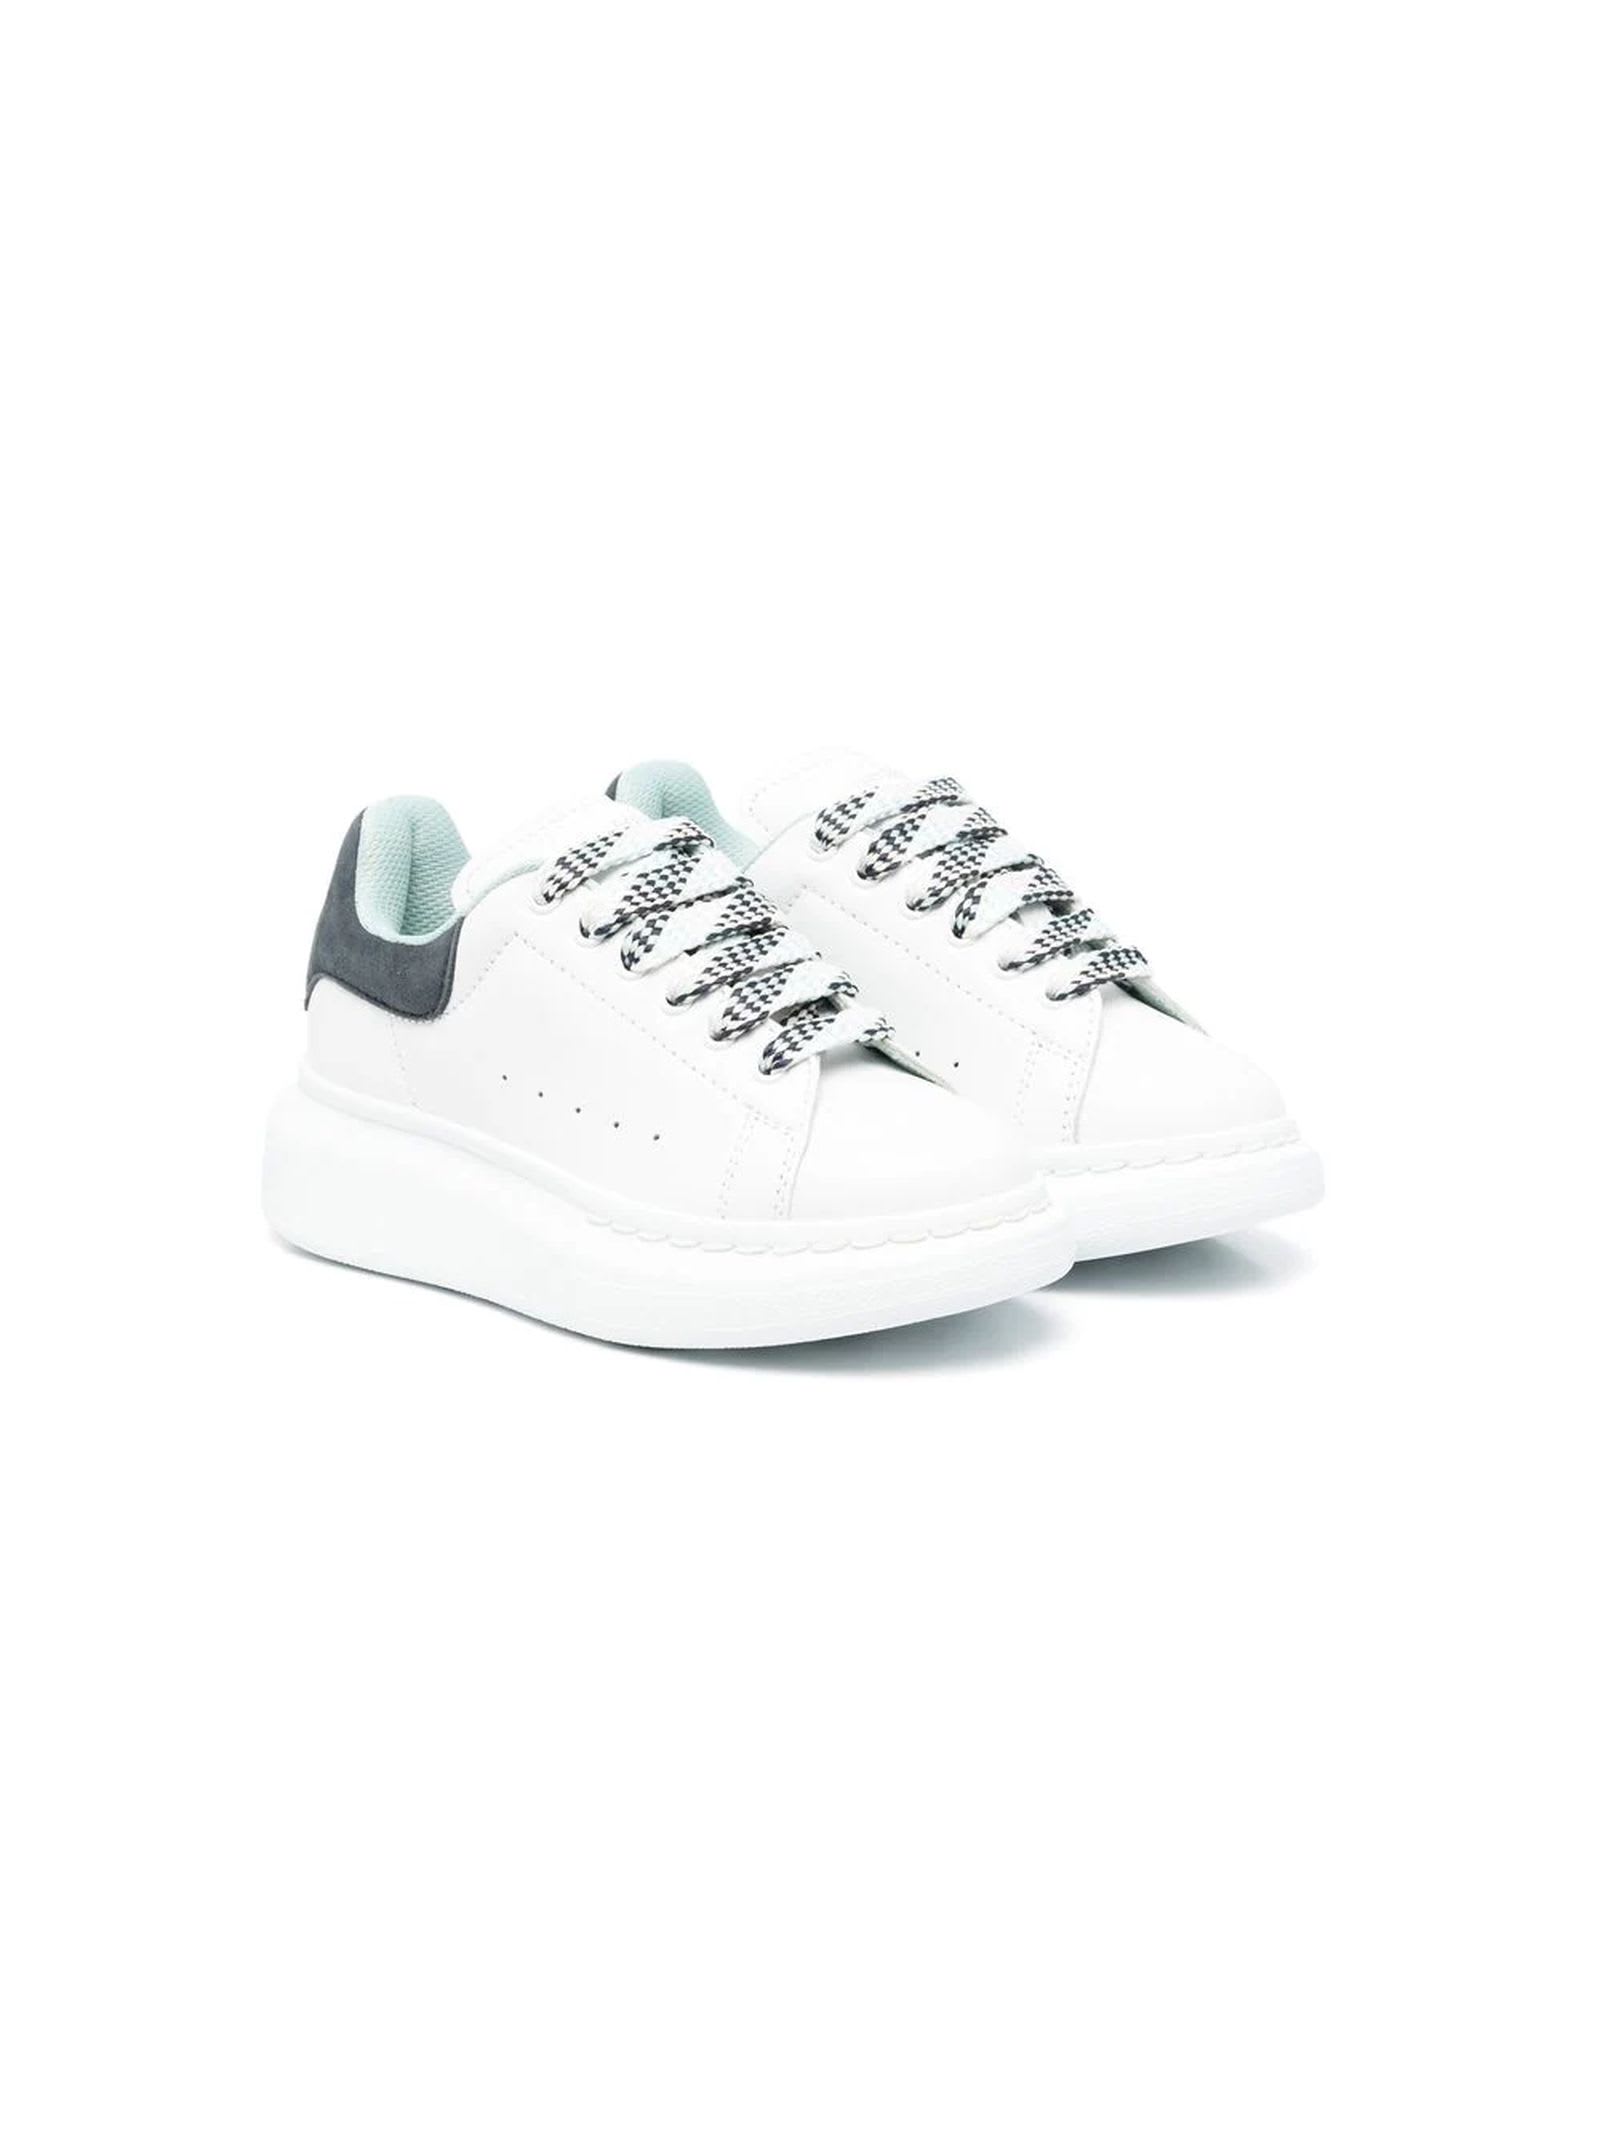 Alexander McQueen White Calf Leather Sneakers